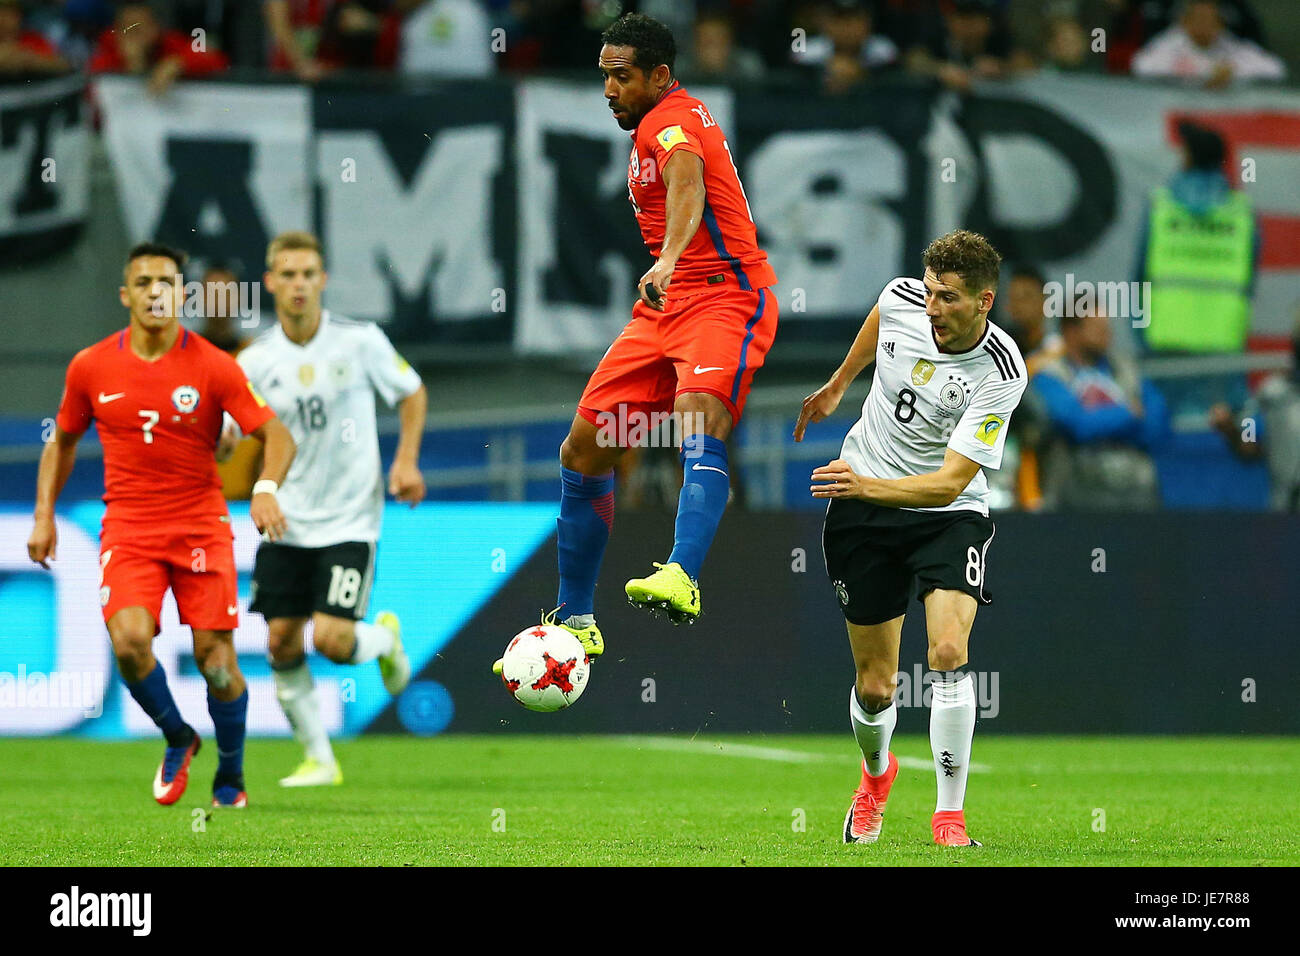 Kazan, Russia. 22nd Jun, 2017. Leon Goretzka of Germany contests bidding with Jean Beausejour of Chile during a match between Germany and Chile valid for the second round of the Confederations Cup 2017 on Thursday (22), held at the Kazan Arena in Kazan, Russia. Credit: Foto Arena LTDA/Alamy Live News Stock Photo